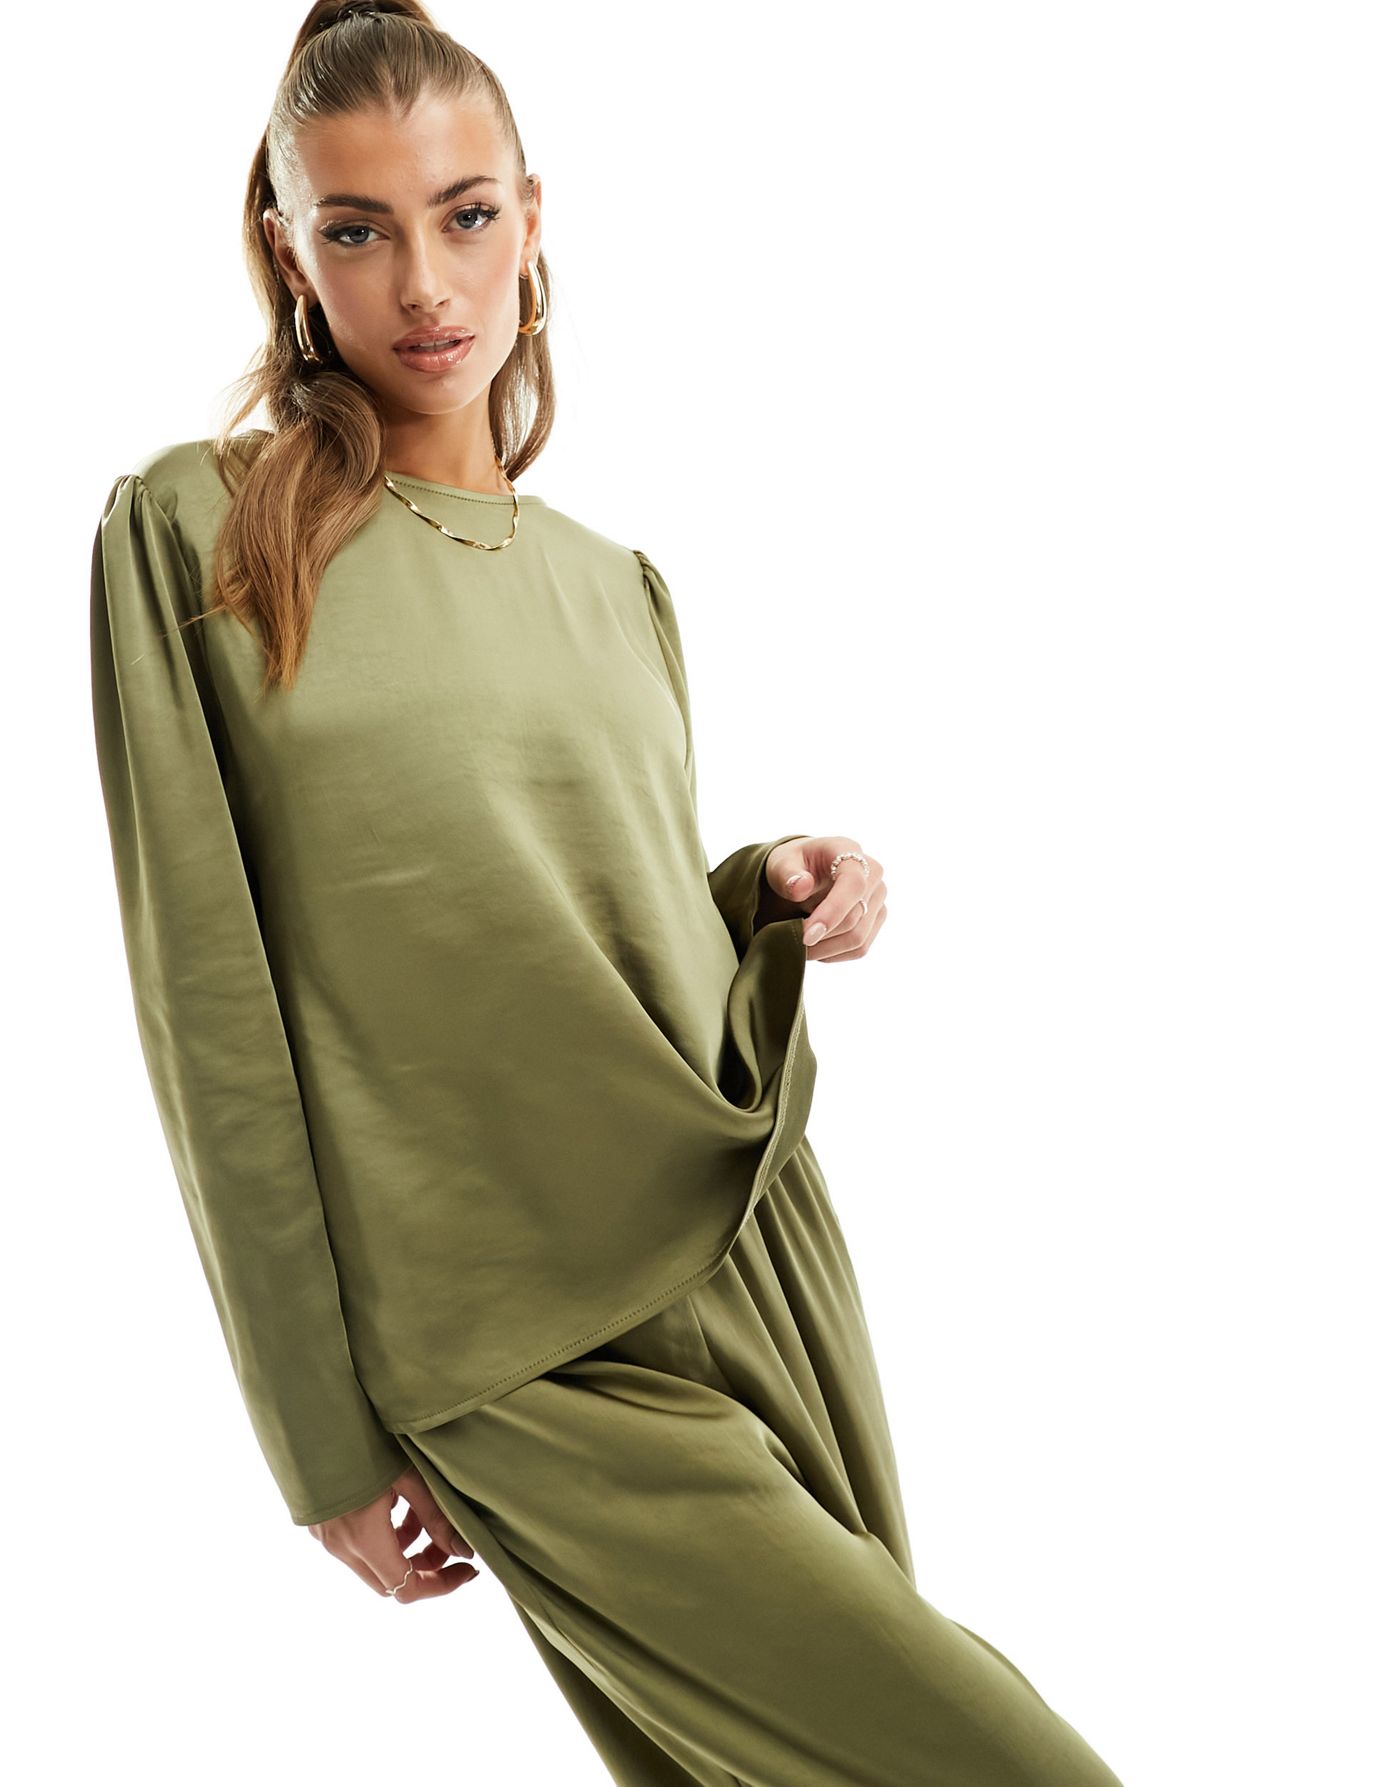 Flounce London satin oversized top in olive co-ord